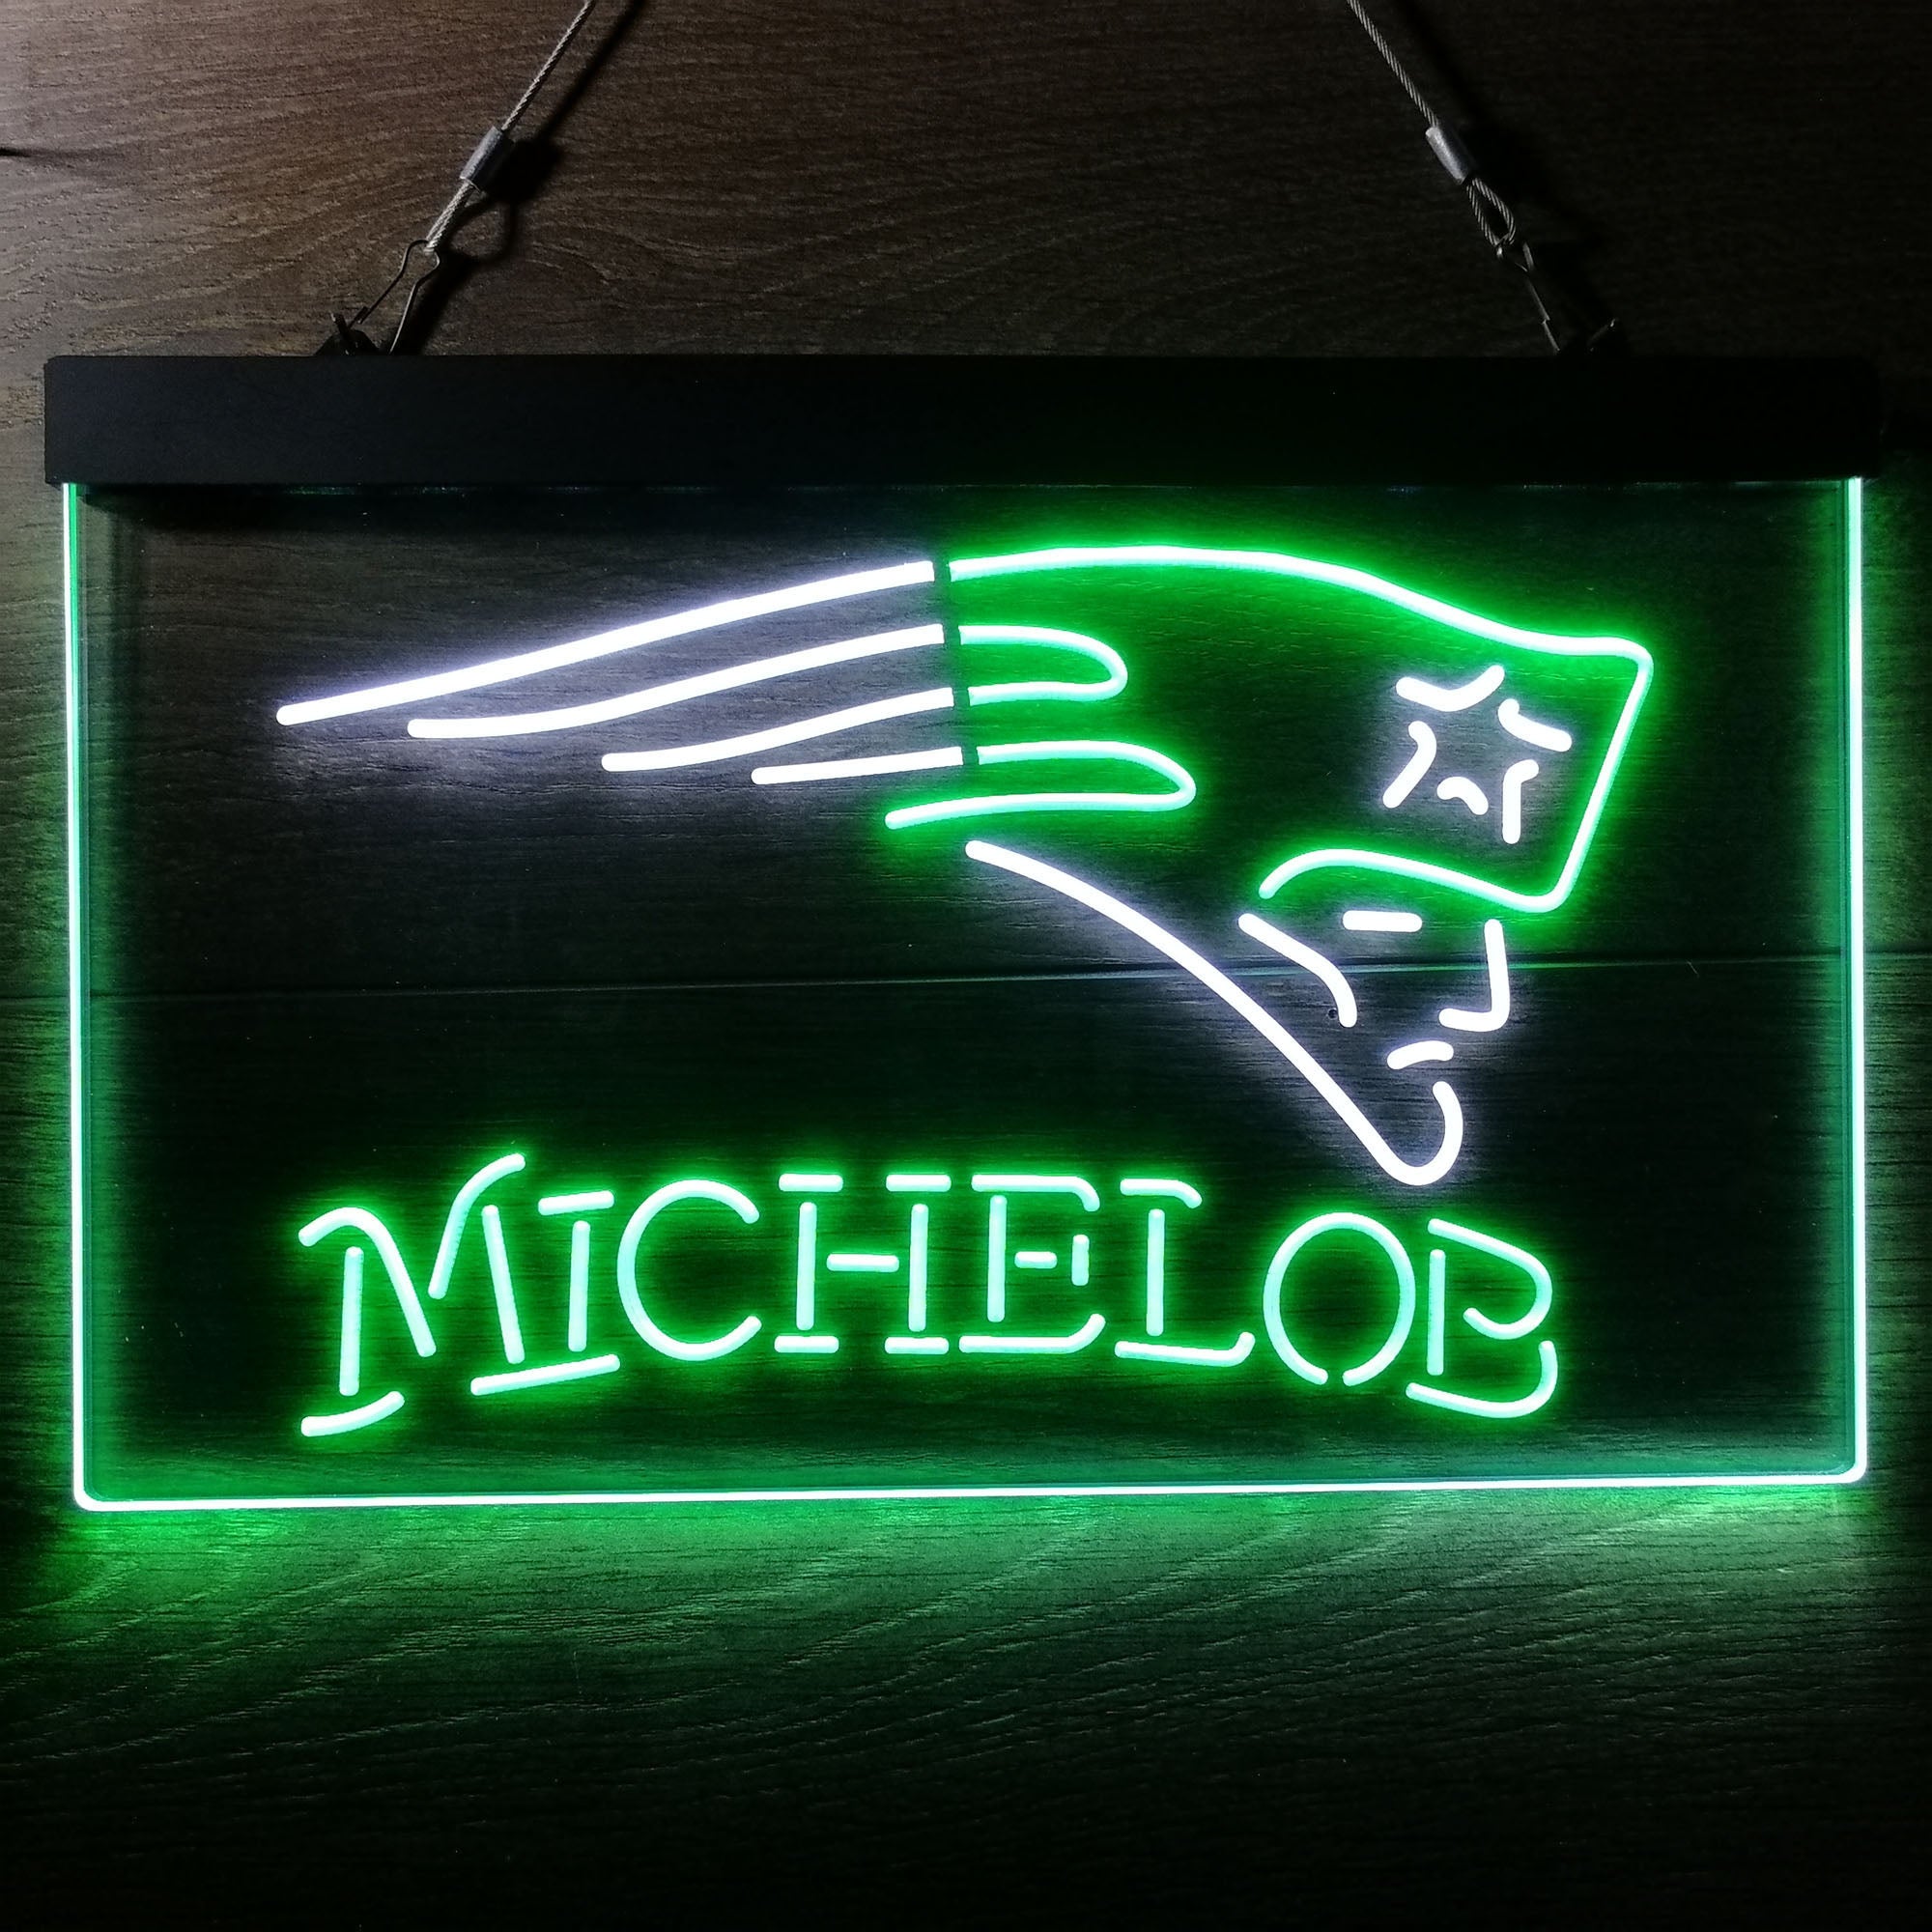 New Englands Football Club Patriots League Michelob Bar LED Neon Sign